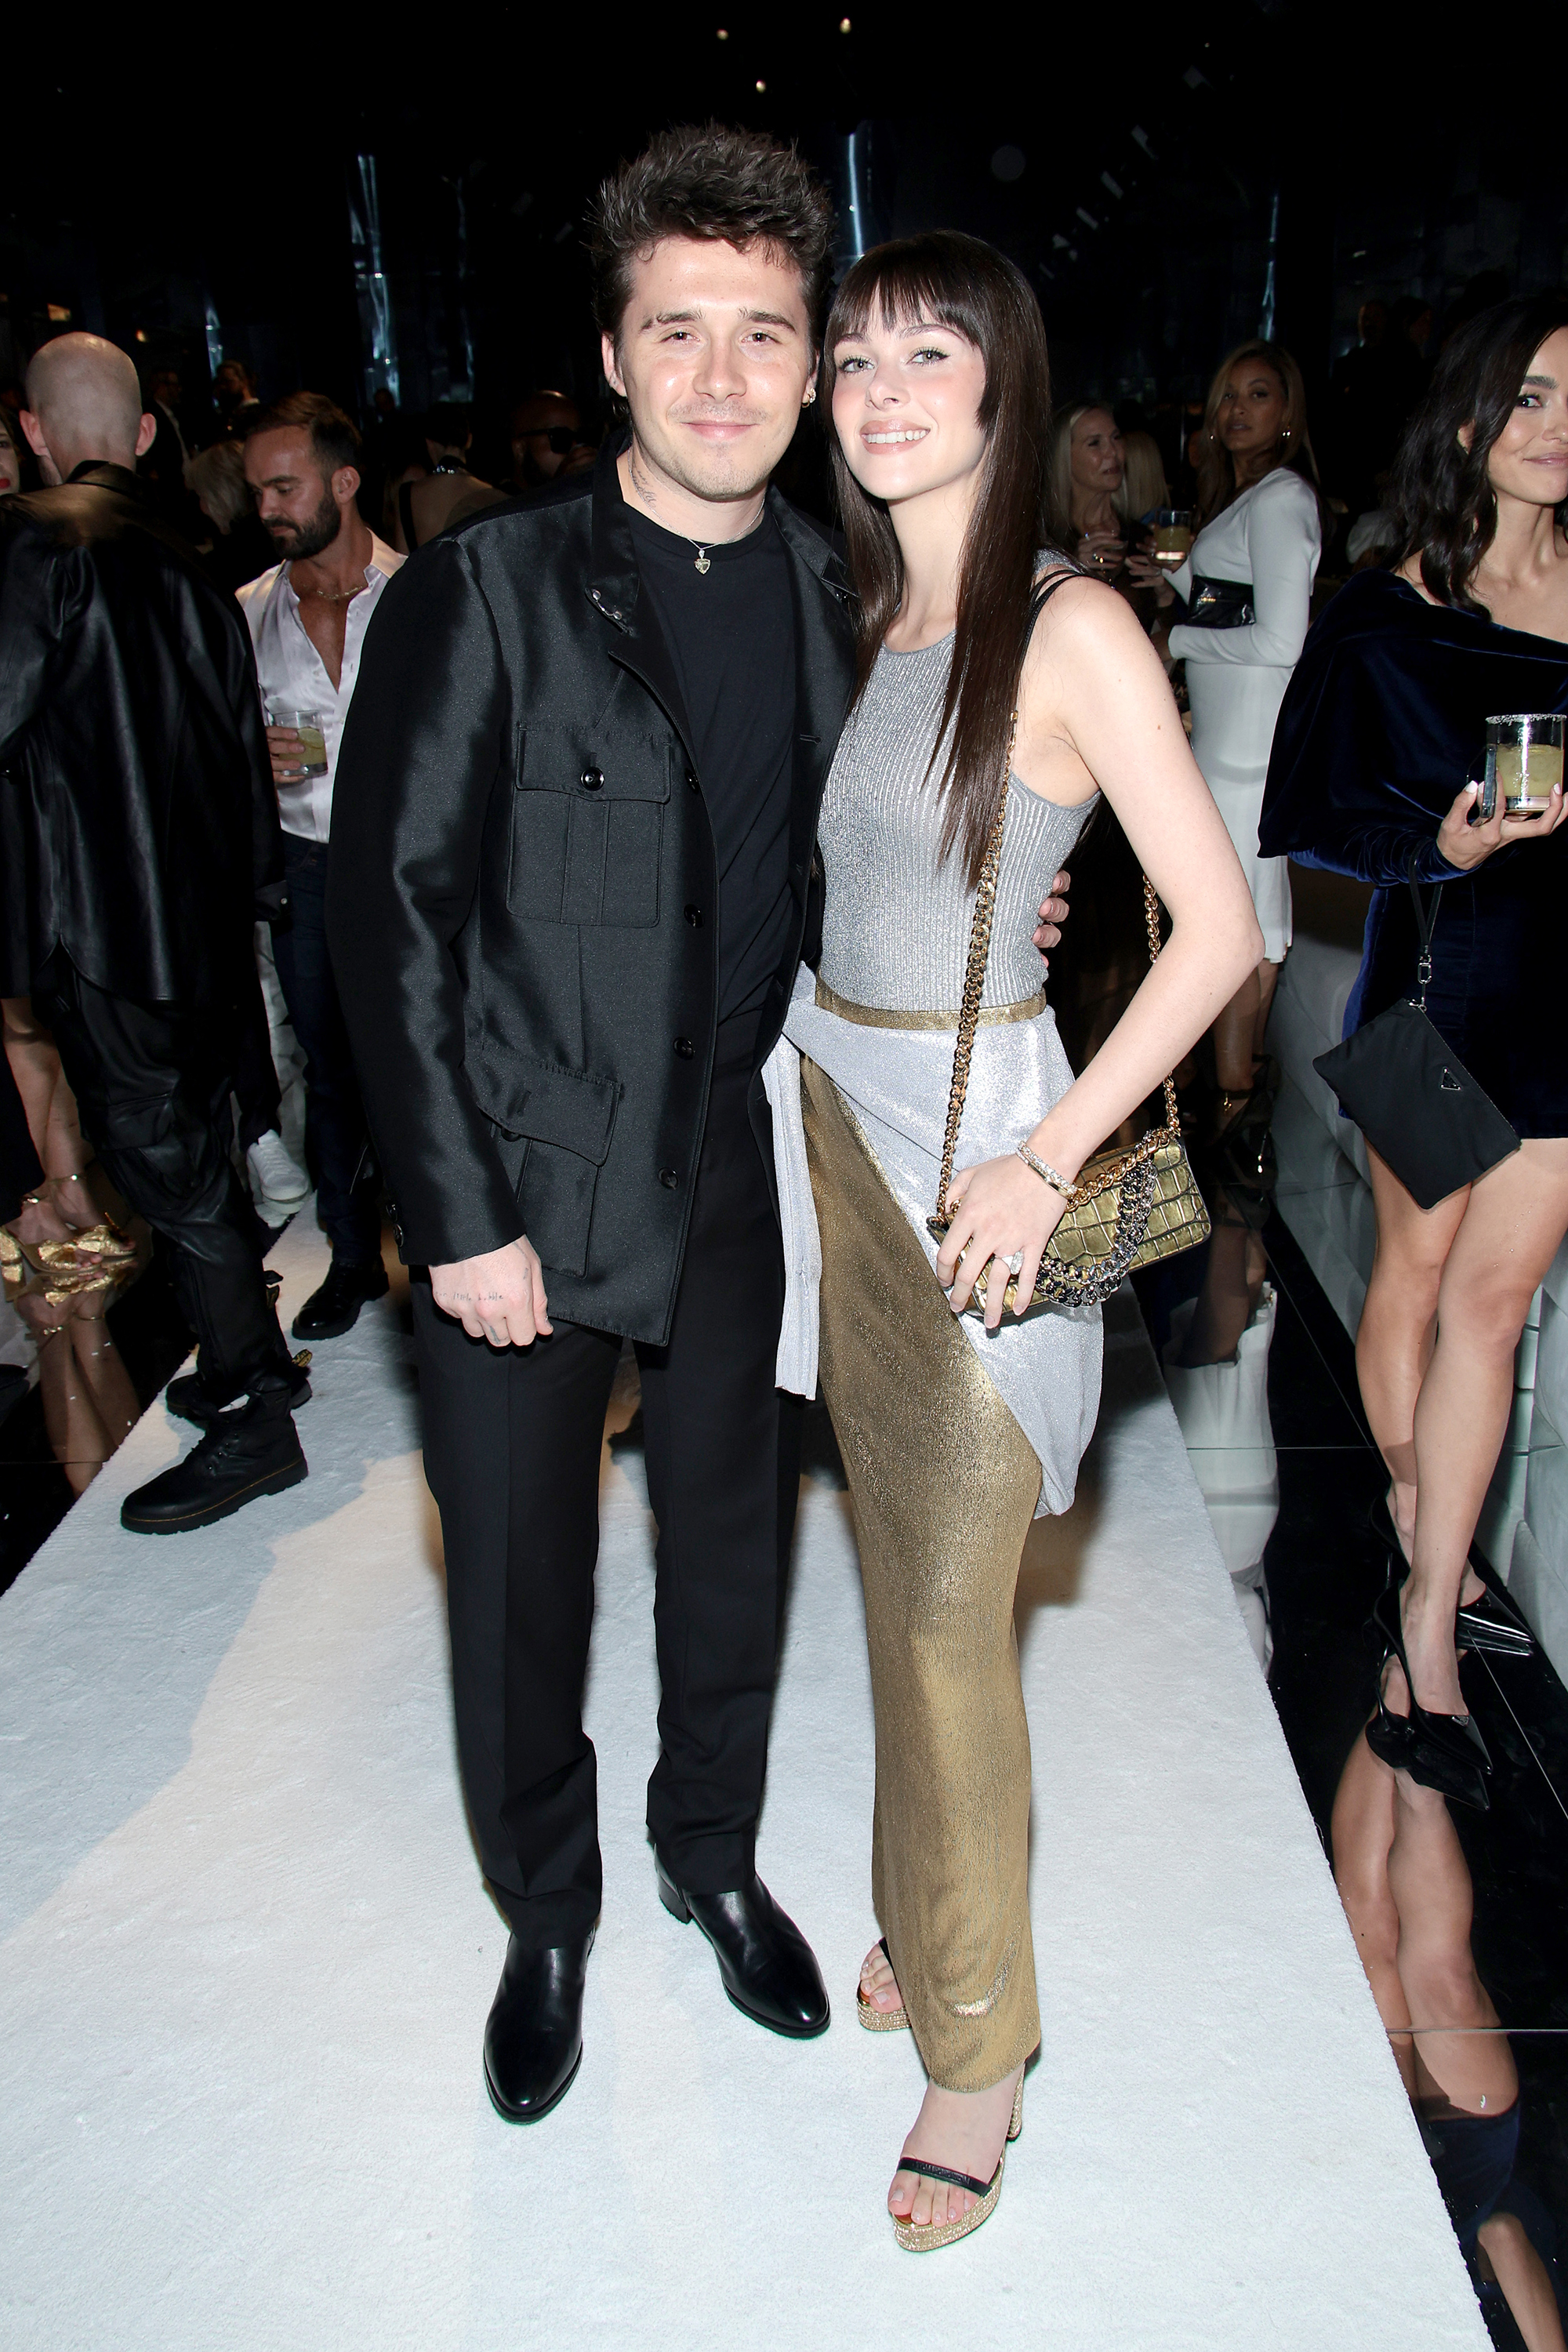 Brooklyn Beckham and Nicola Peltz attend the Tom Ford show during NYFW 2022